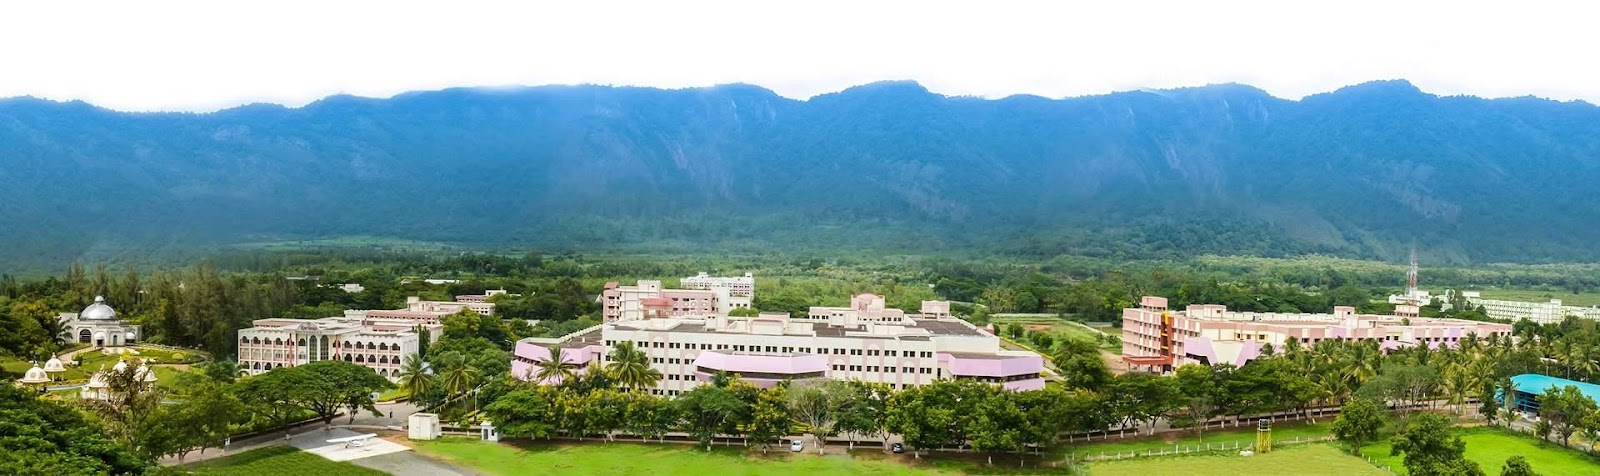 Karunya Institute of technology and sciences, team to river city is one of the colleges that is situated in Coimbatore and is a leading engineering college in the particular area.